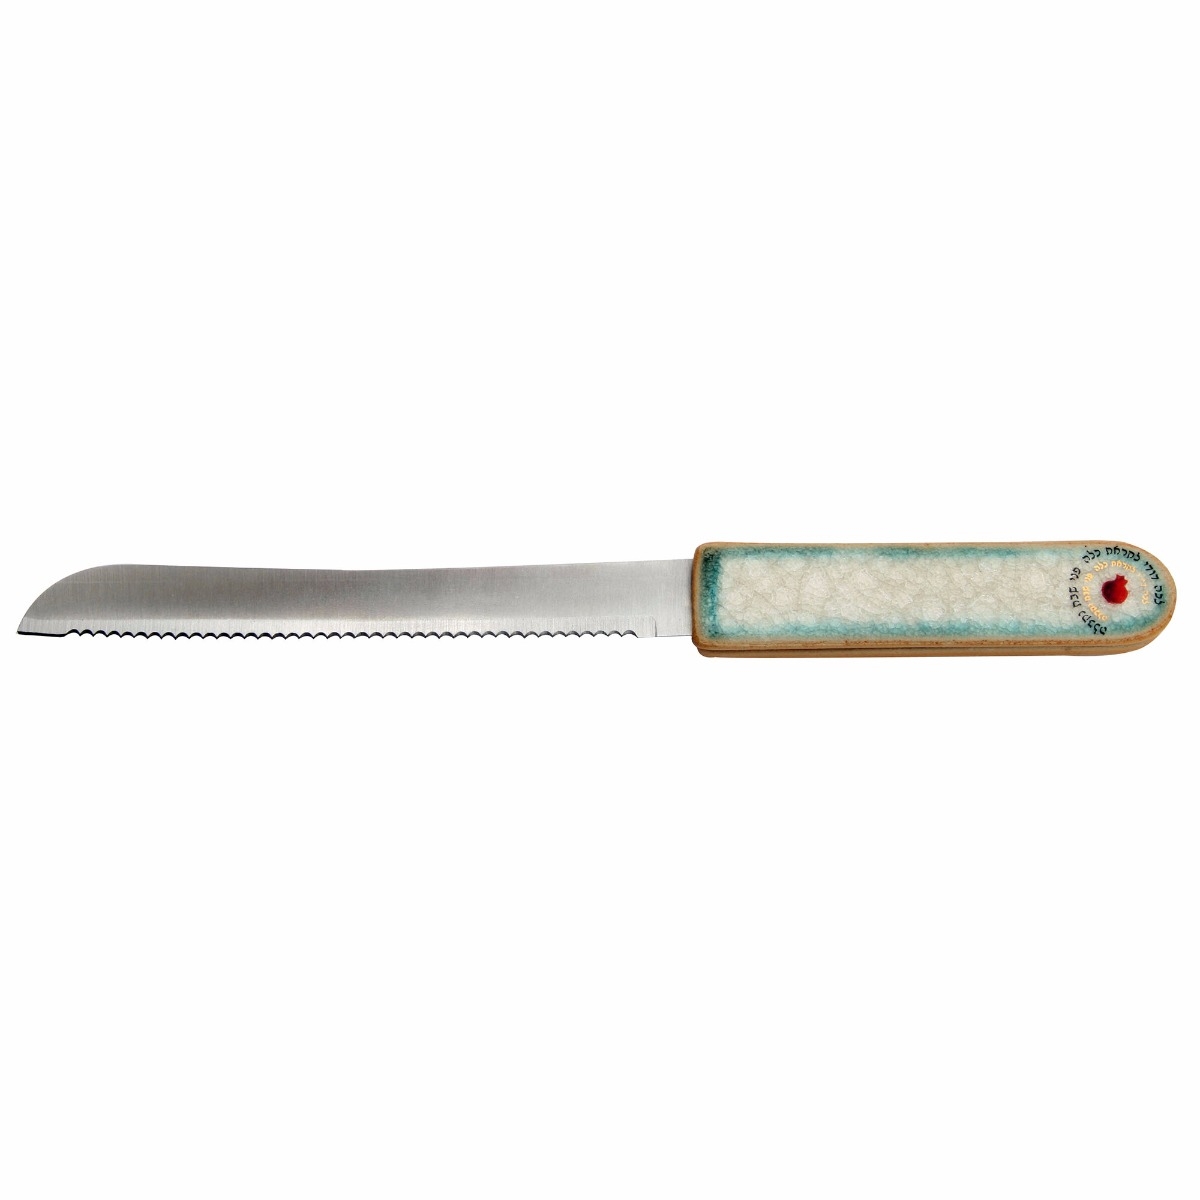 Ceramic and Stainless Steel Challah Knife with Lecha Dodi and Pomegranate - 1